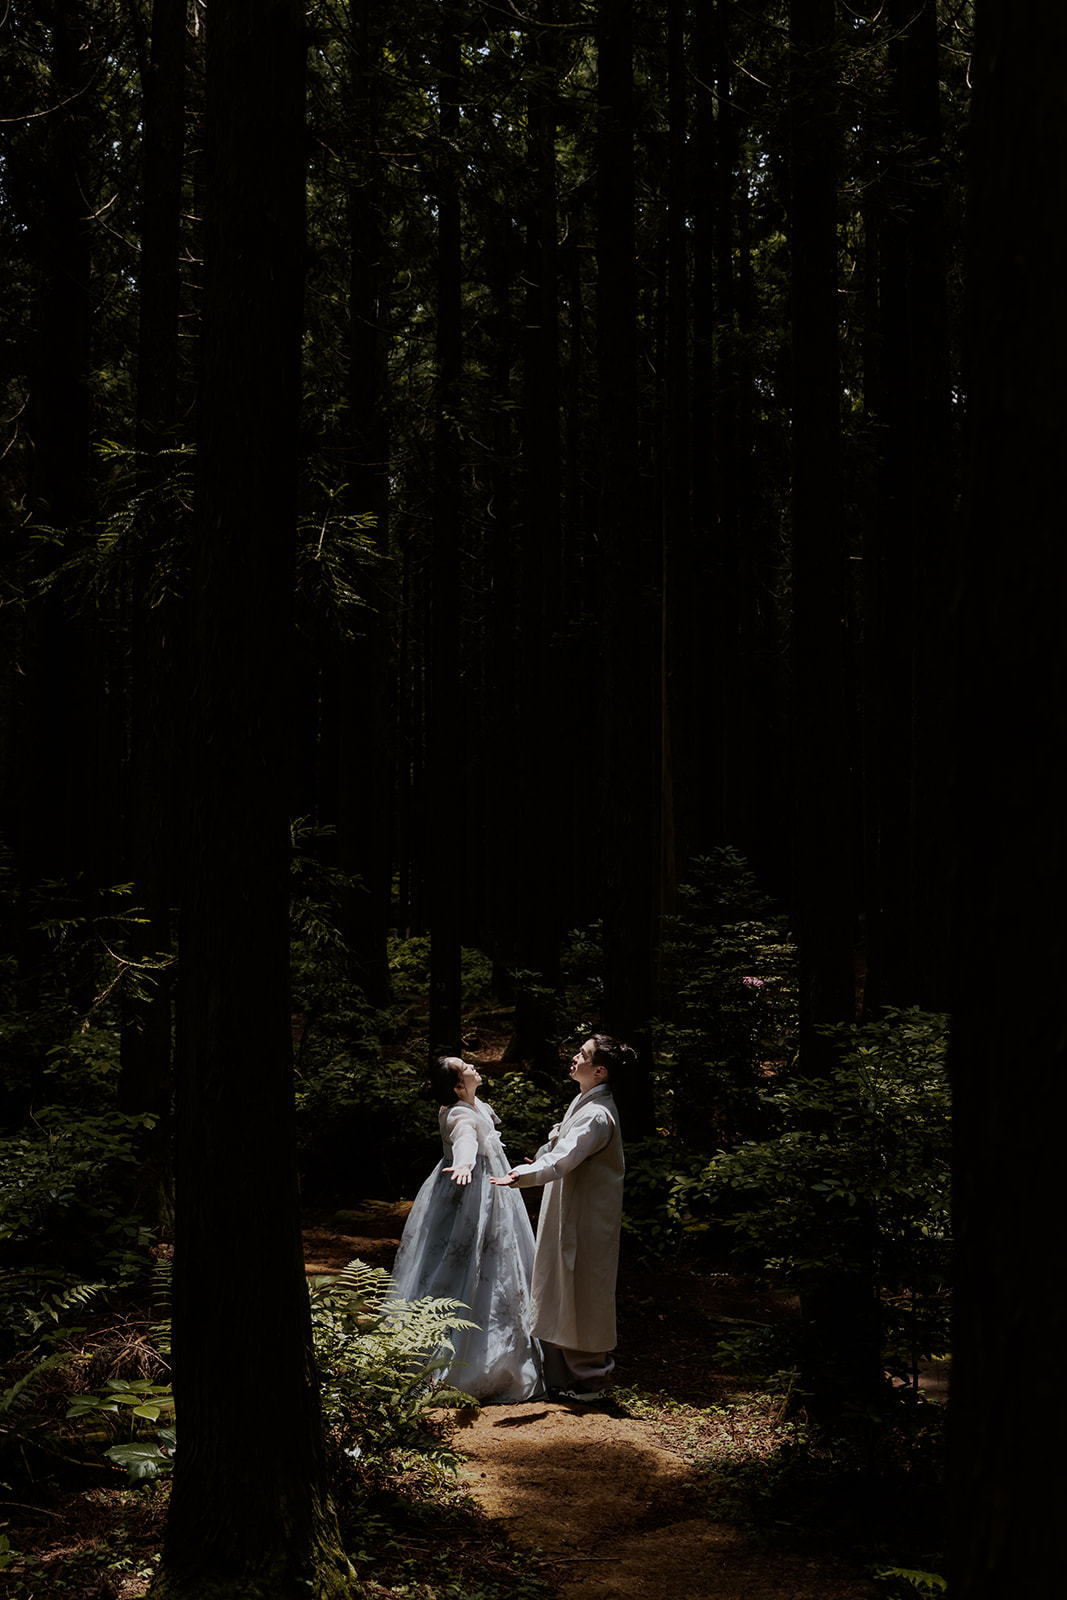 A pre-wedding couple posing in a tranquil wooded area in Korea.